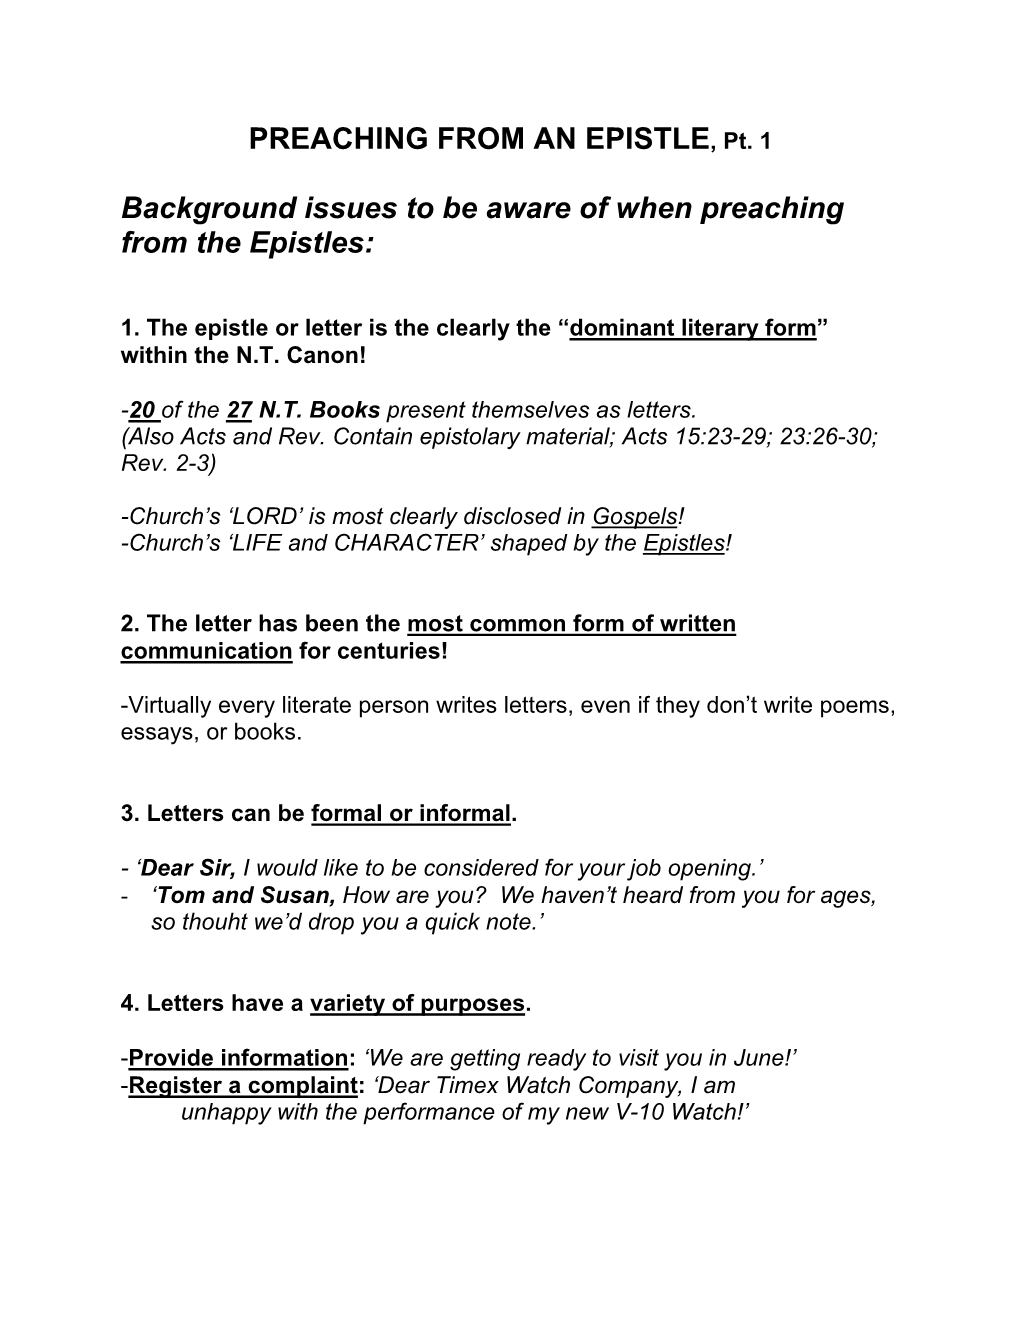 PREACHING from an EPISTLE, Pt. 1 Background Issues to Be Aware Of